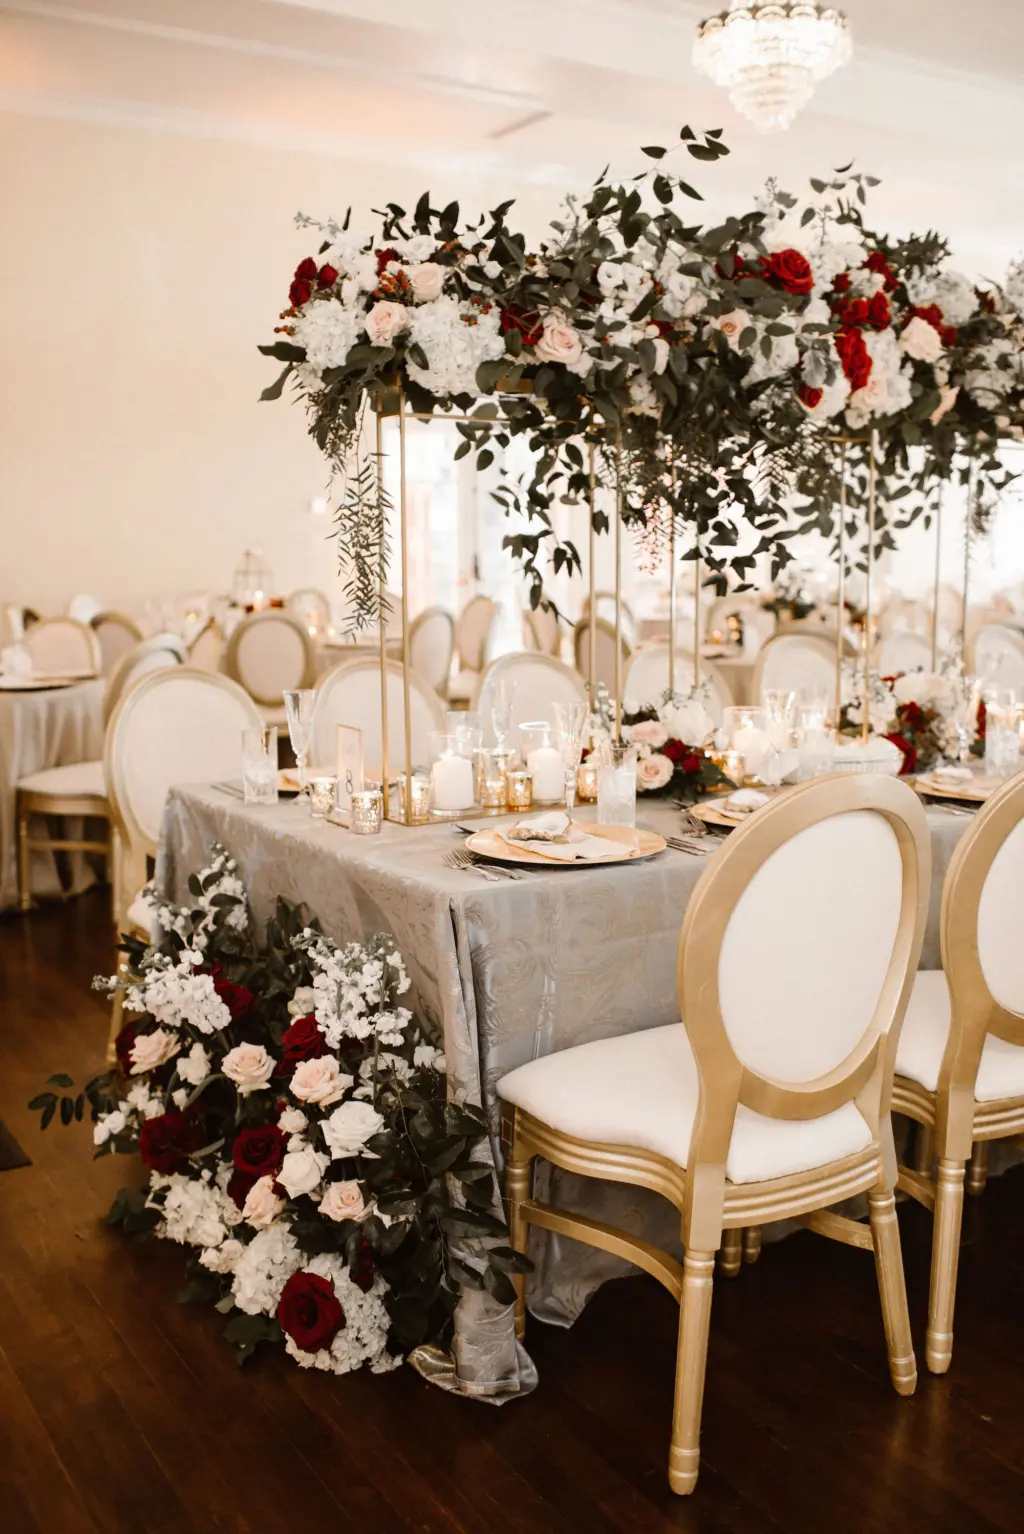 Tall Gold Flower Stand with Cascading Greenery, Burgundy, White, and Blush Rose Centerpiece Inspiration | Gold Chargers and Long Feasting Table for Wedding Reception